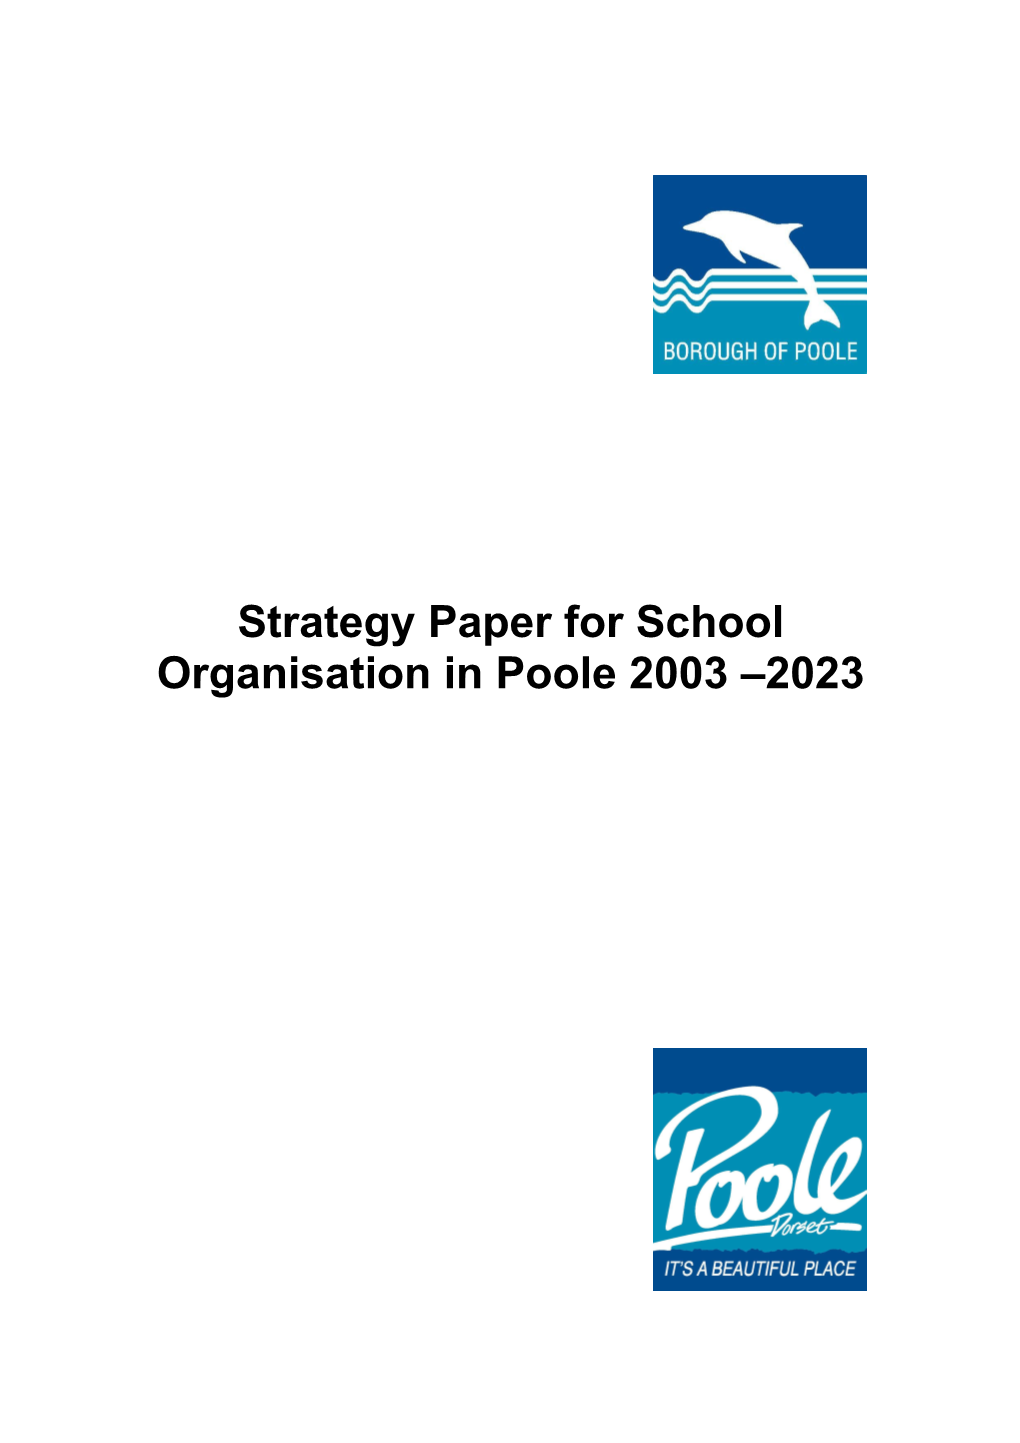 Strategy Paper for School Organisation in Poole 2003-2023